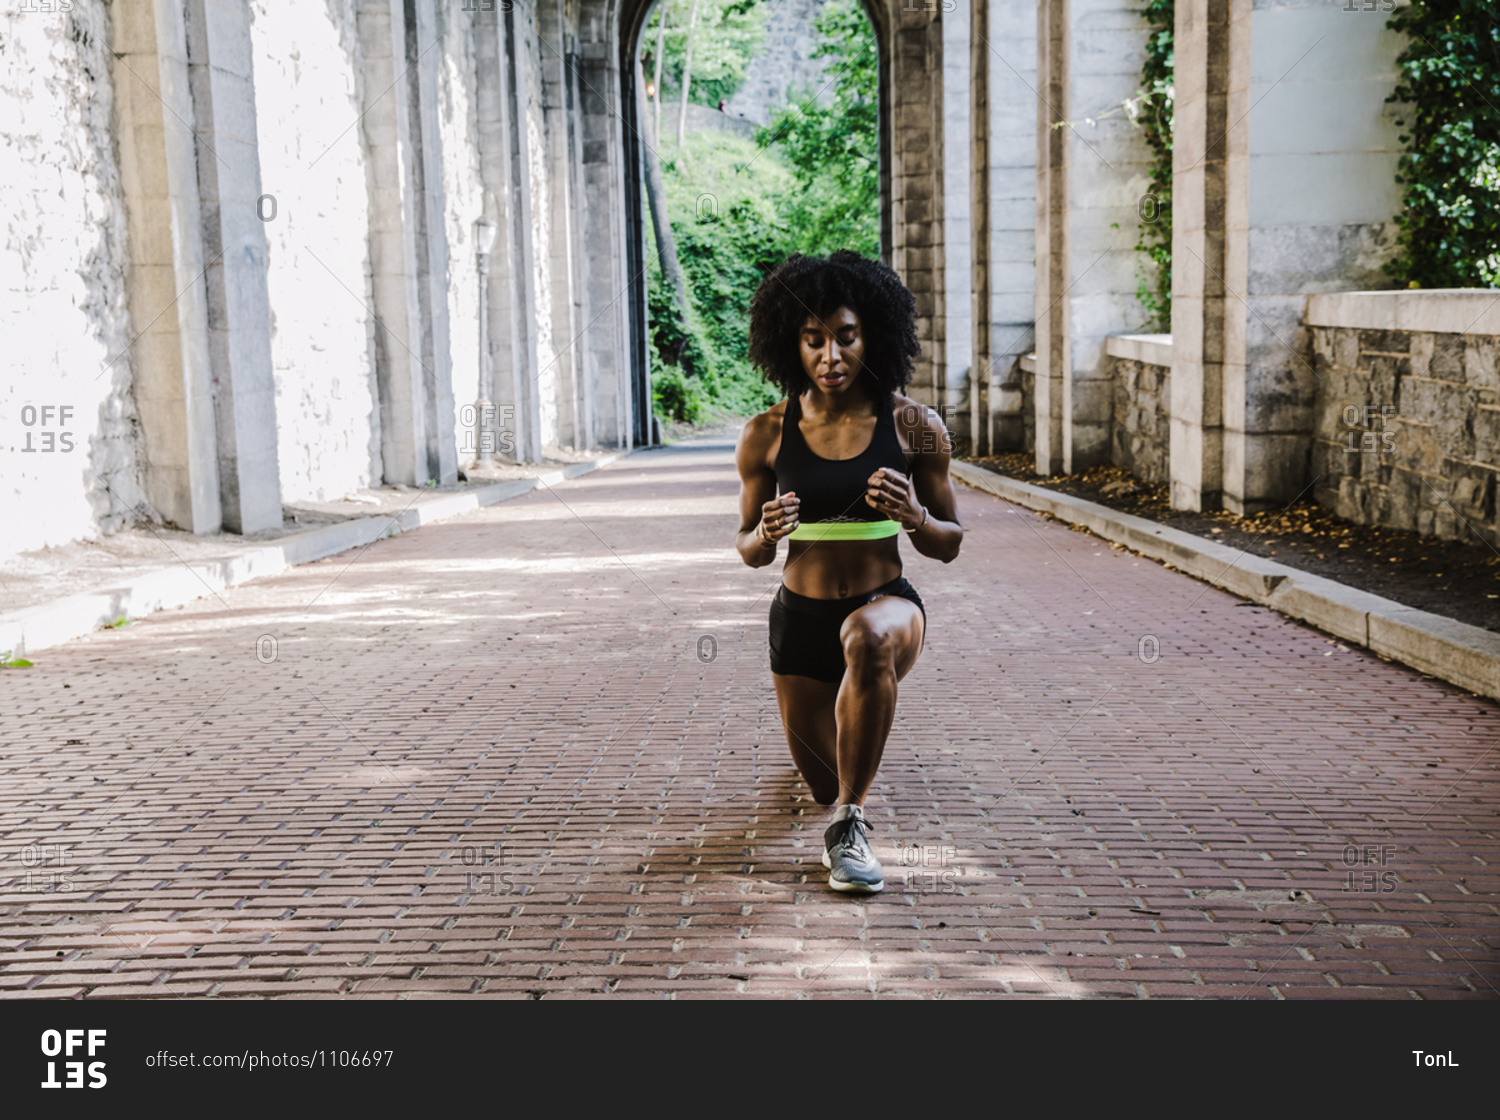 Black woman in athletic apparel exercising outdoors during daytime